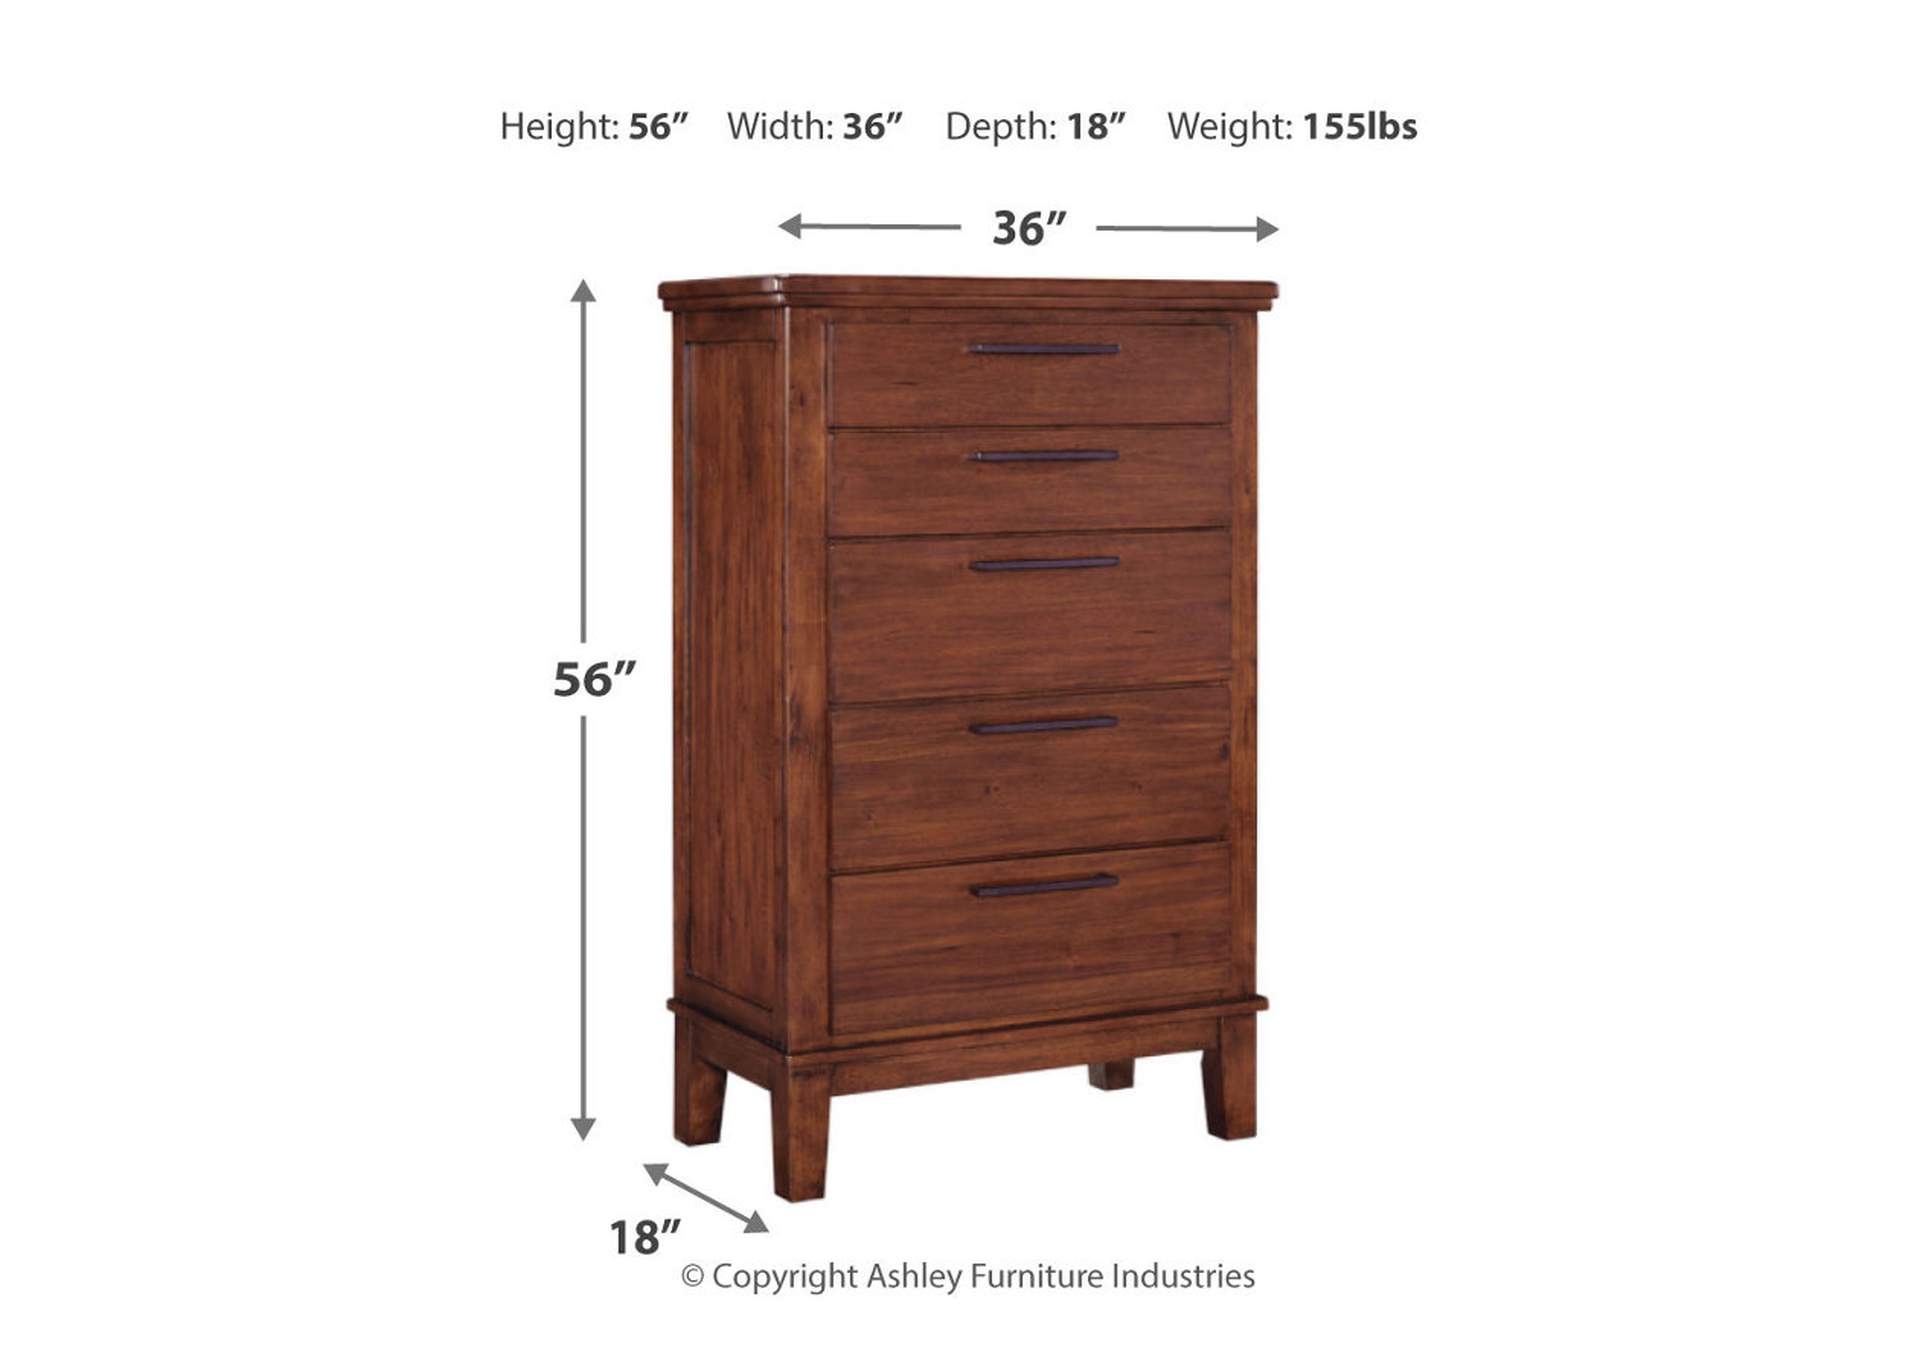 Ralene Chest of Drawers,Signature Design By Ashley